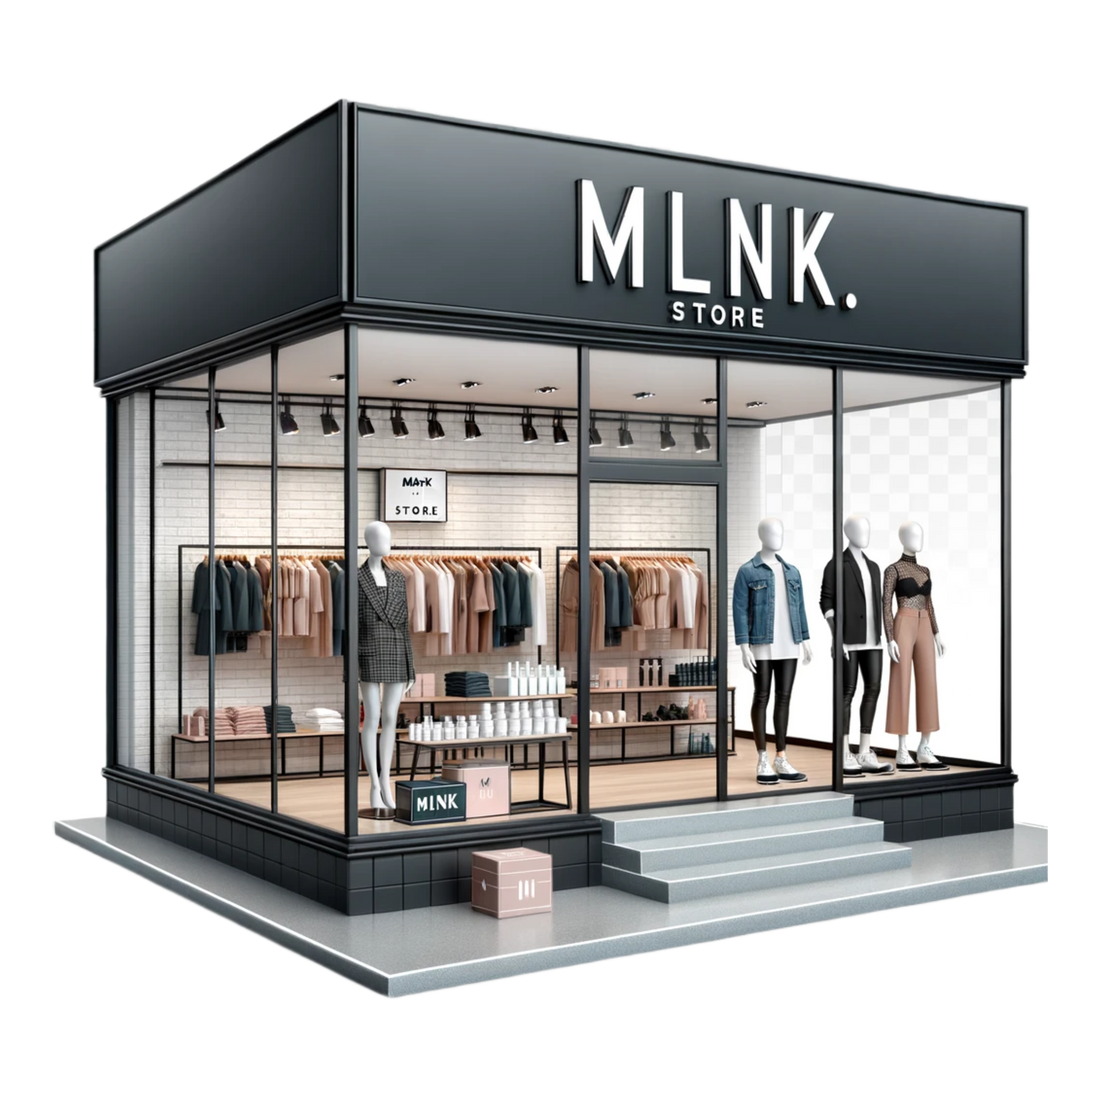 MLNK Store logo amidst a collage of modern apparel and skincare products, embodying the blend of fashion and self-care.